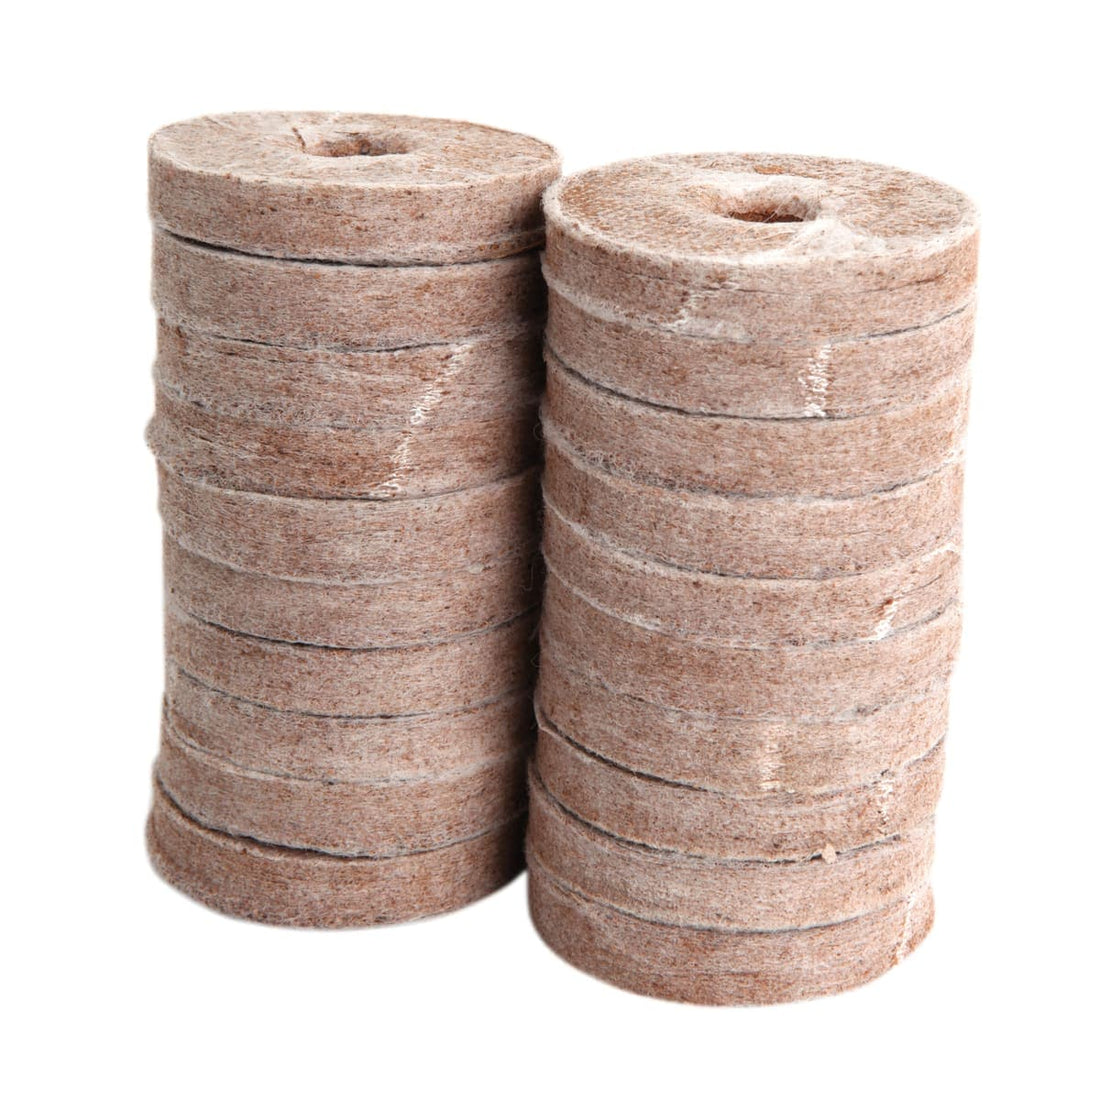 20 COCO PADS 50 MM - best price from Maltashopper.com BR510003042